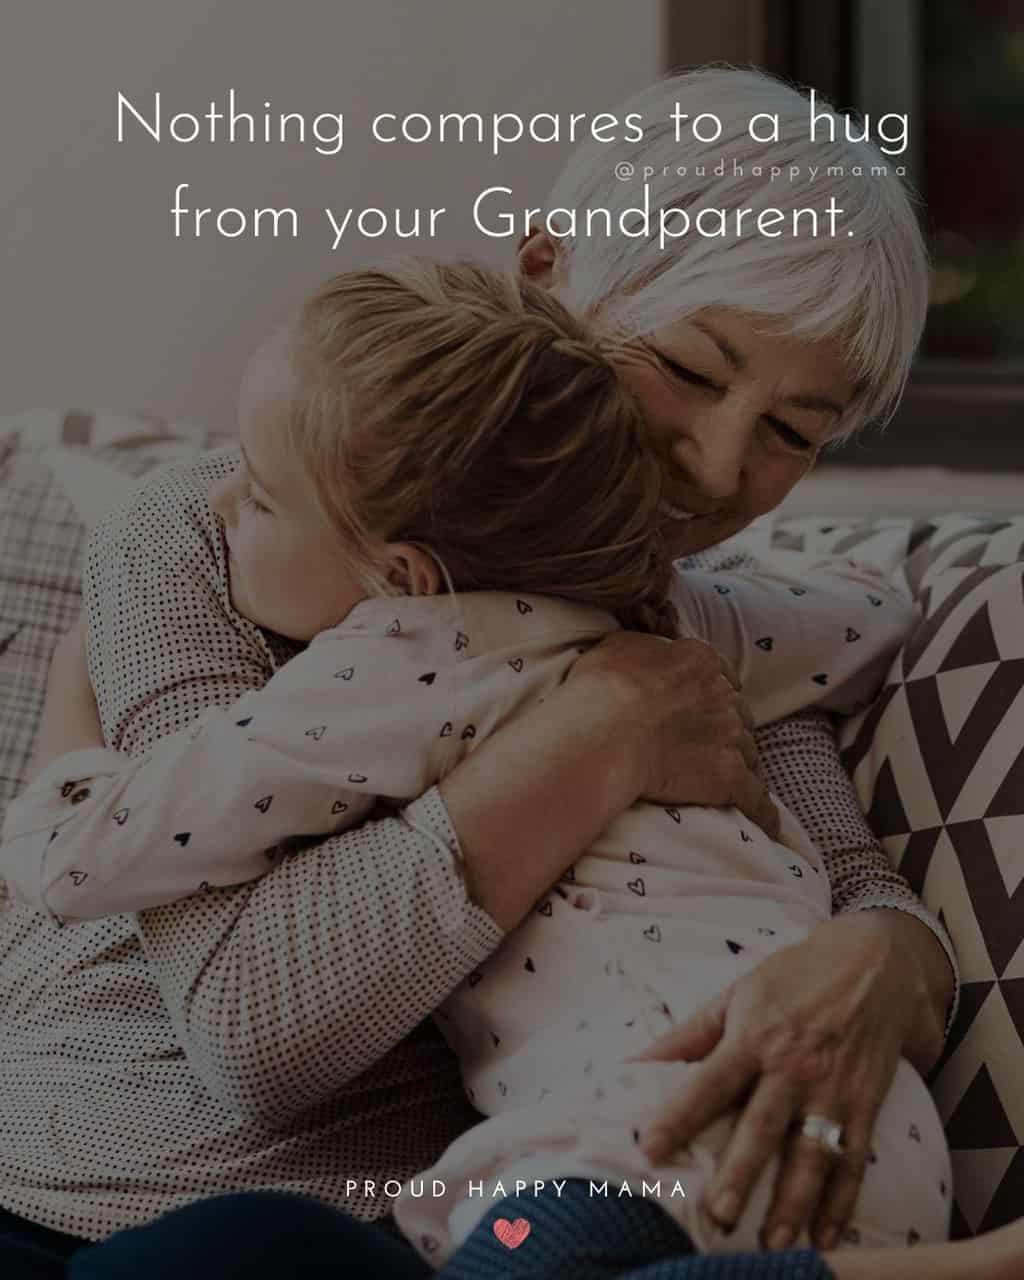 Grandparent Quotes – Nothing compares to a hug from your Grandparent.’